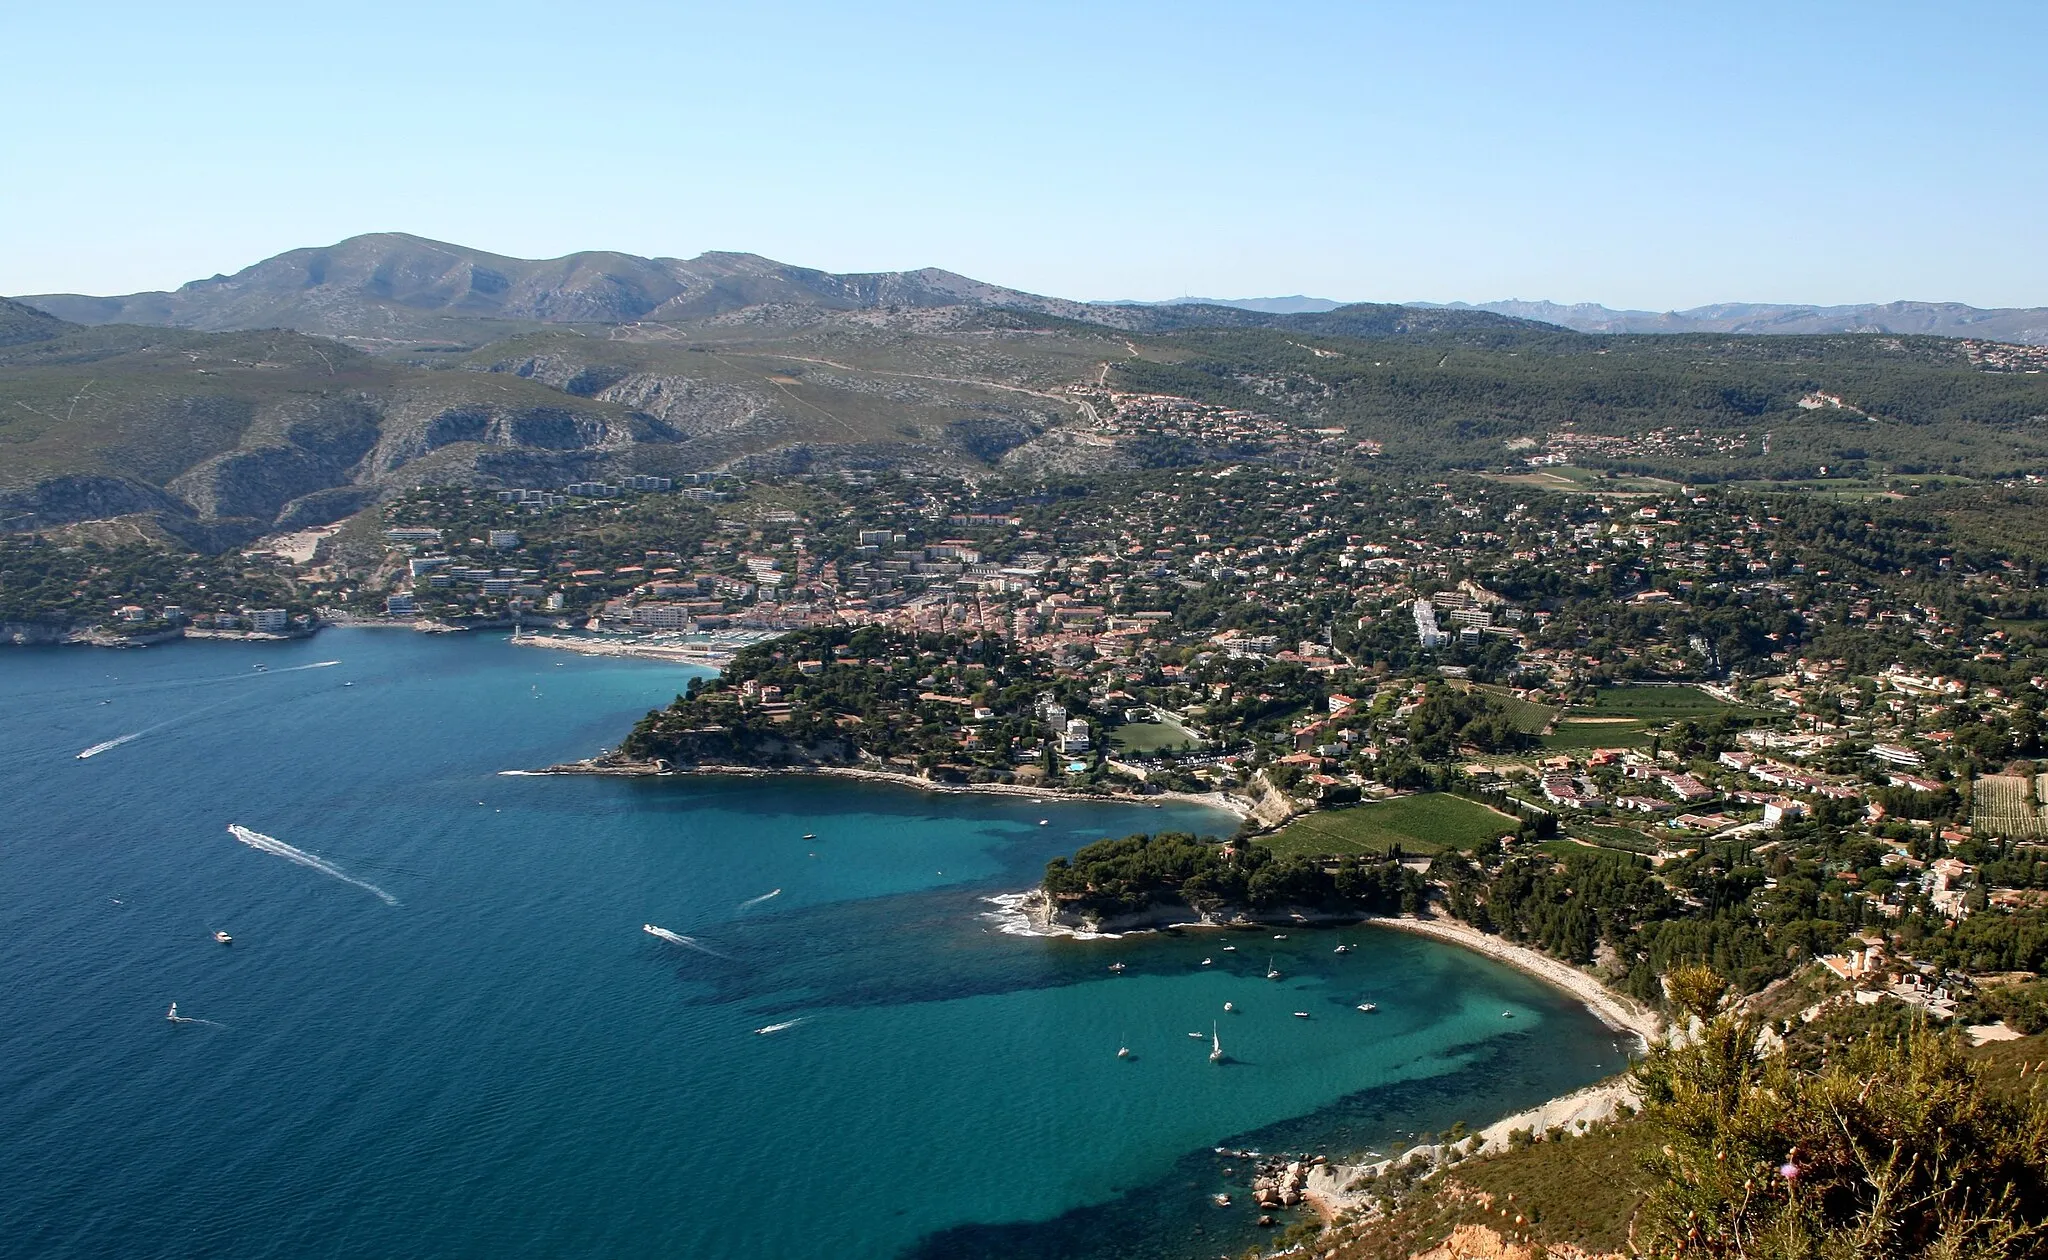 Photo showing: Cassis, a city in southern France, seen from the cliffs